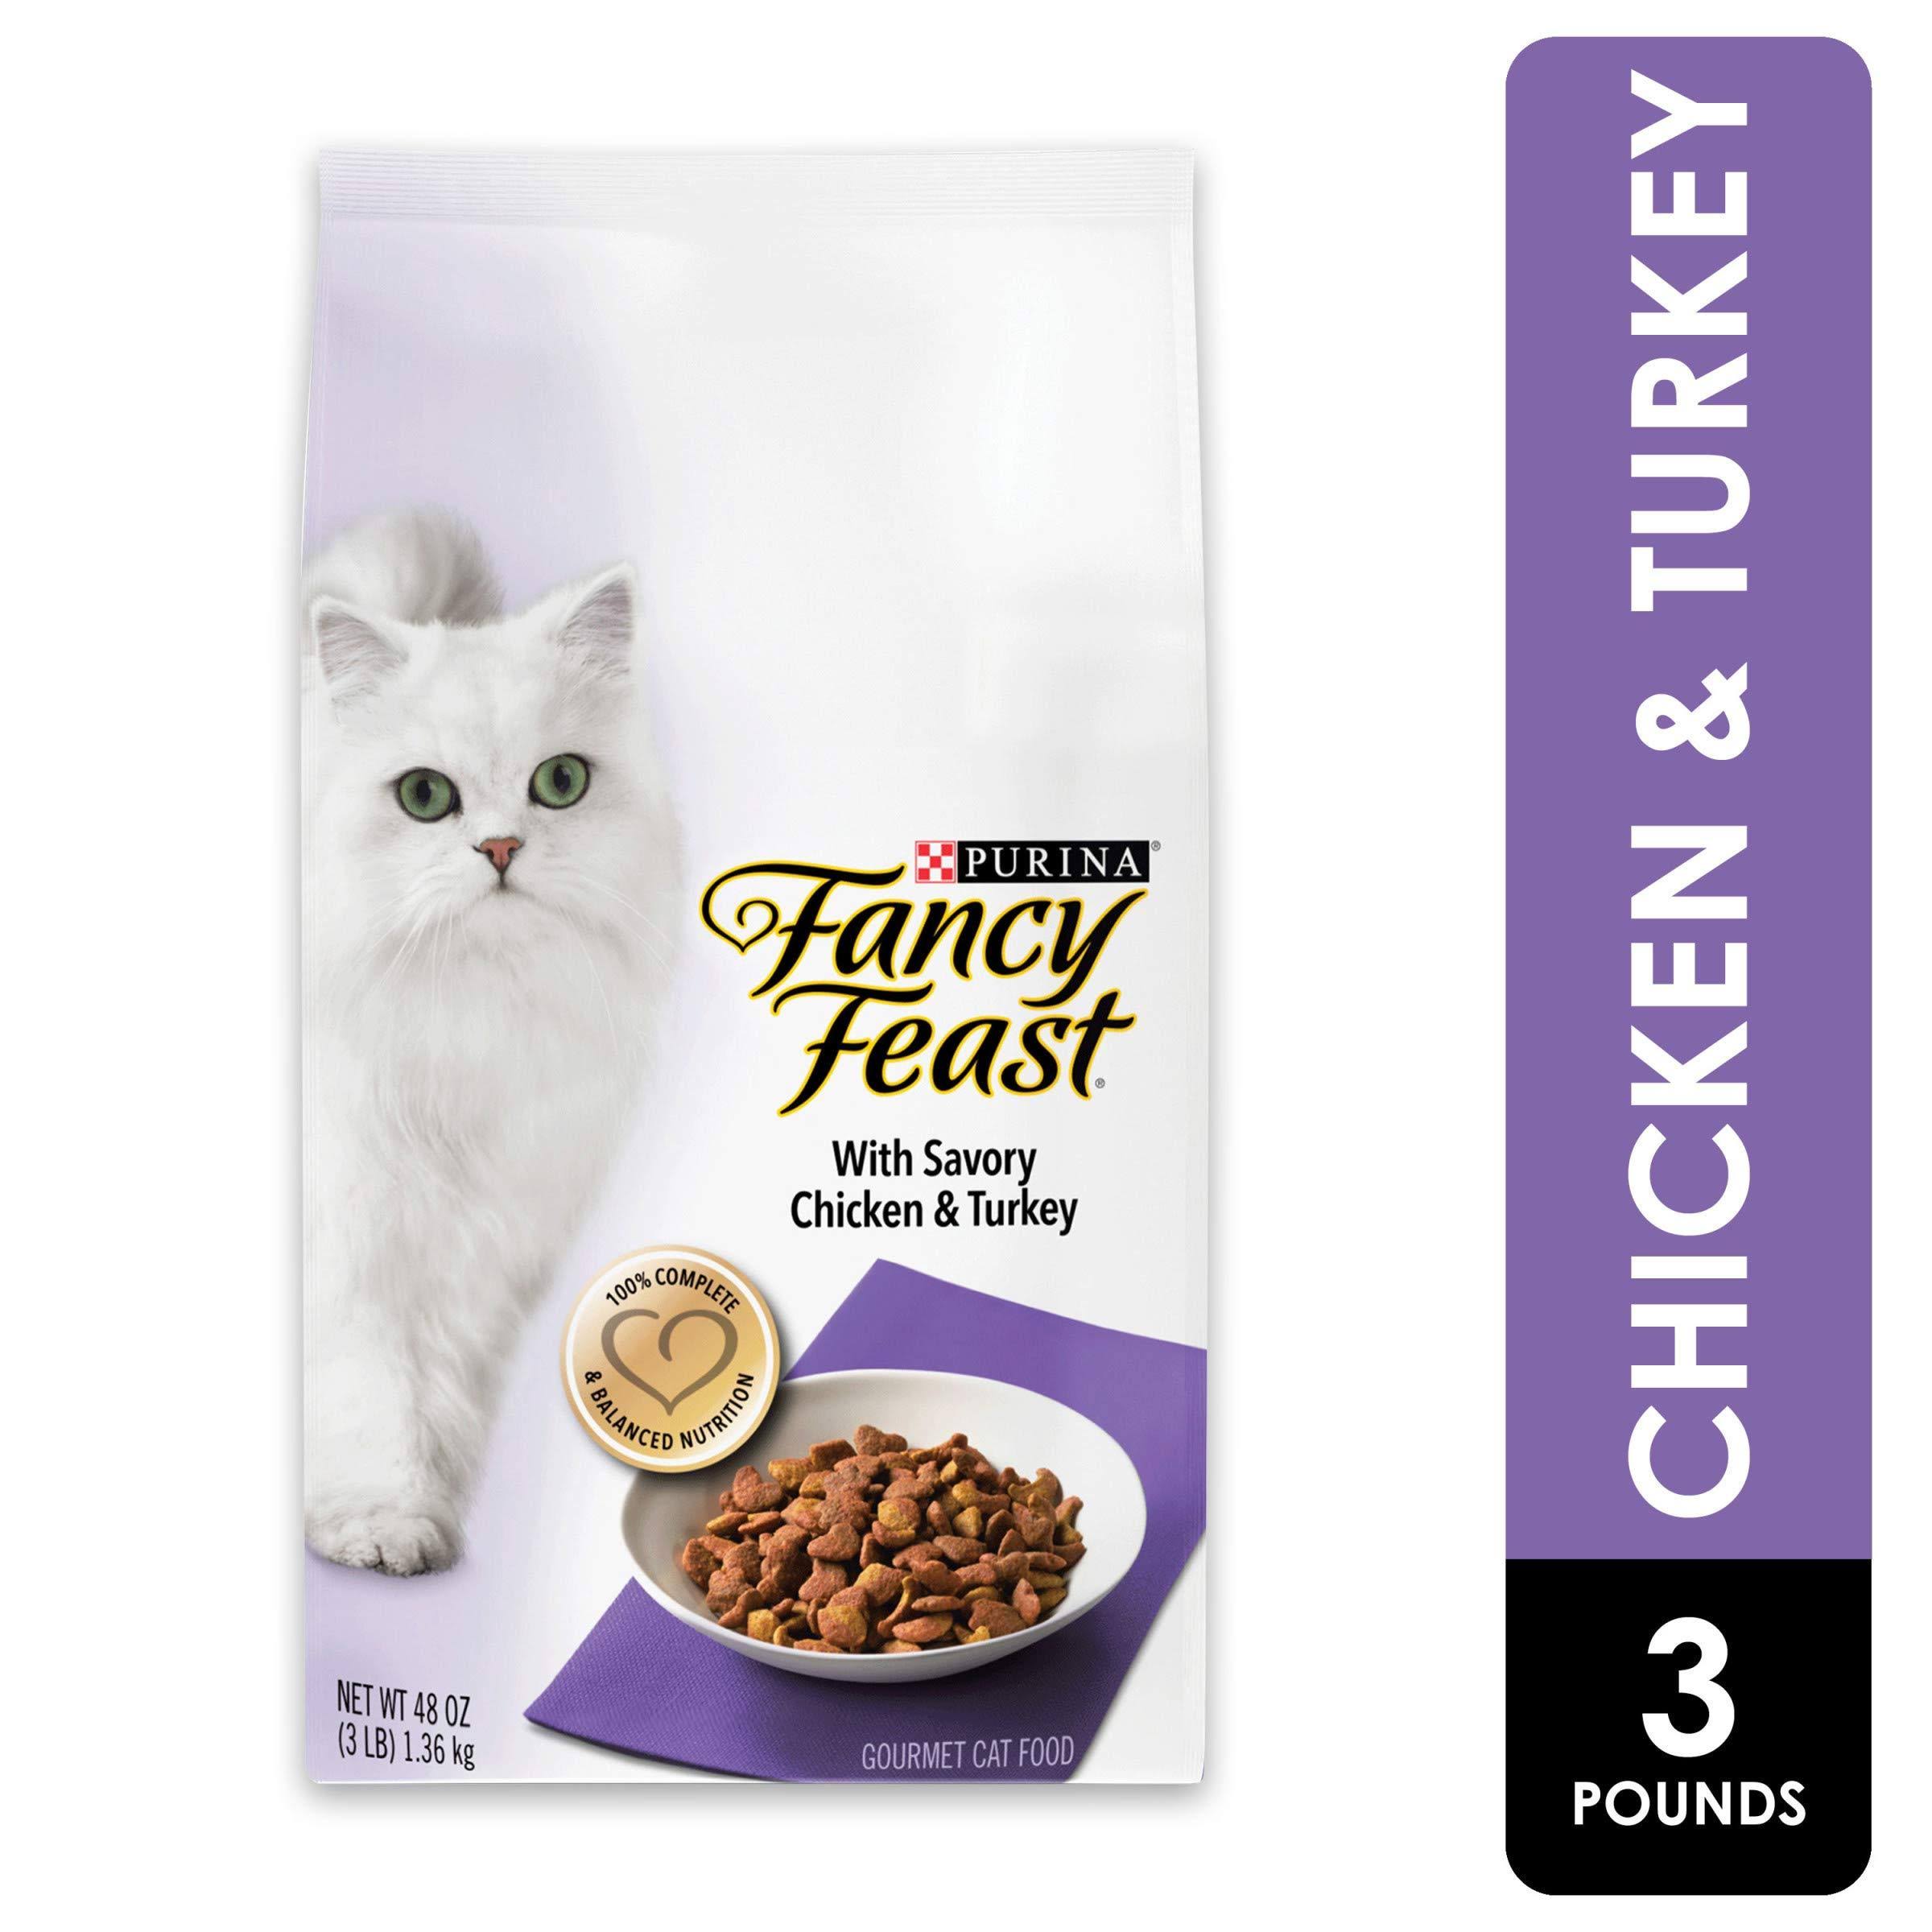 Fancy Feast Dry Cat Food - Savory Chicken and Turkey, 3lbs